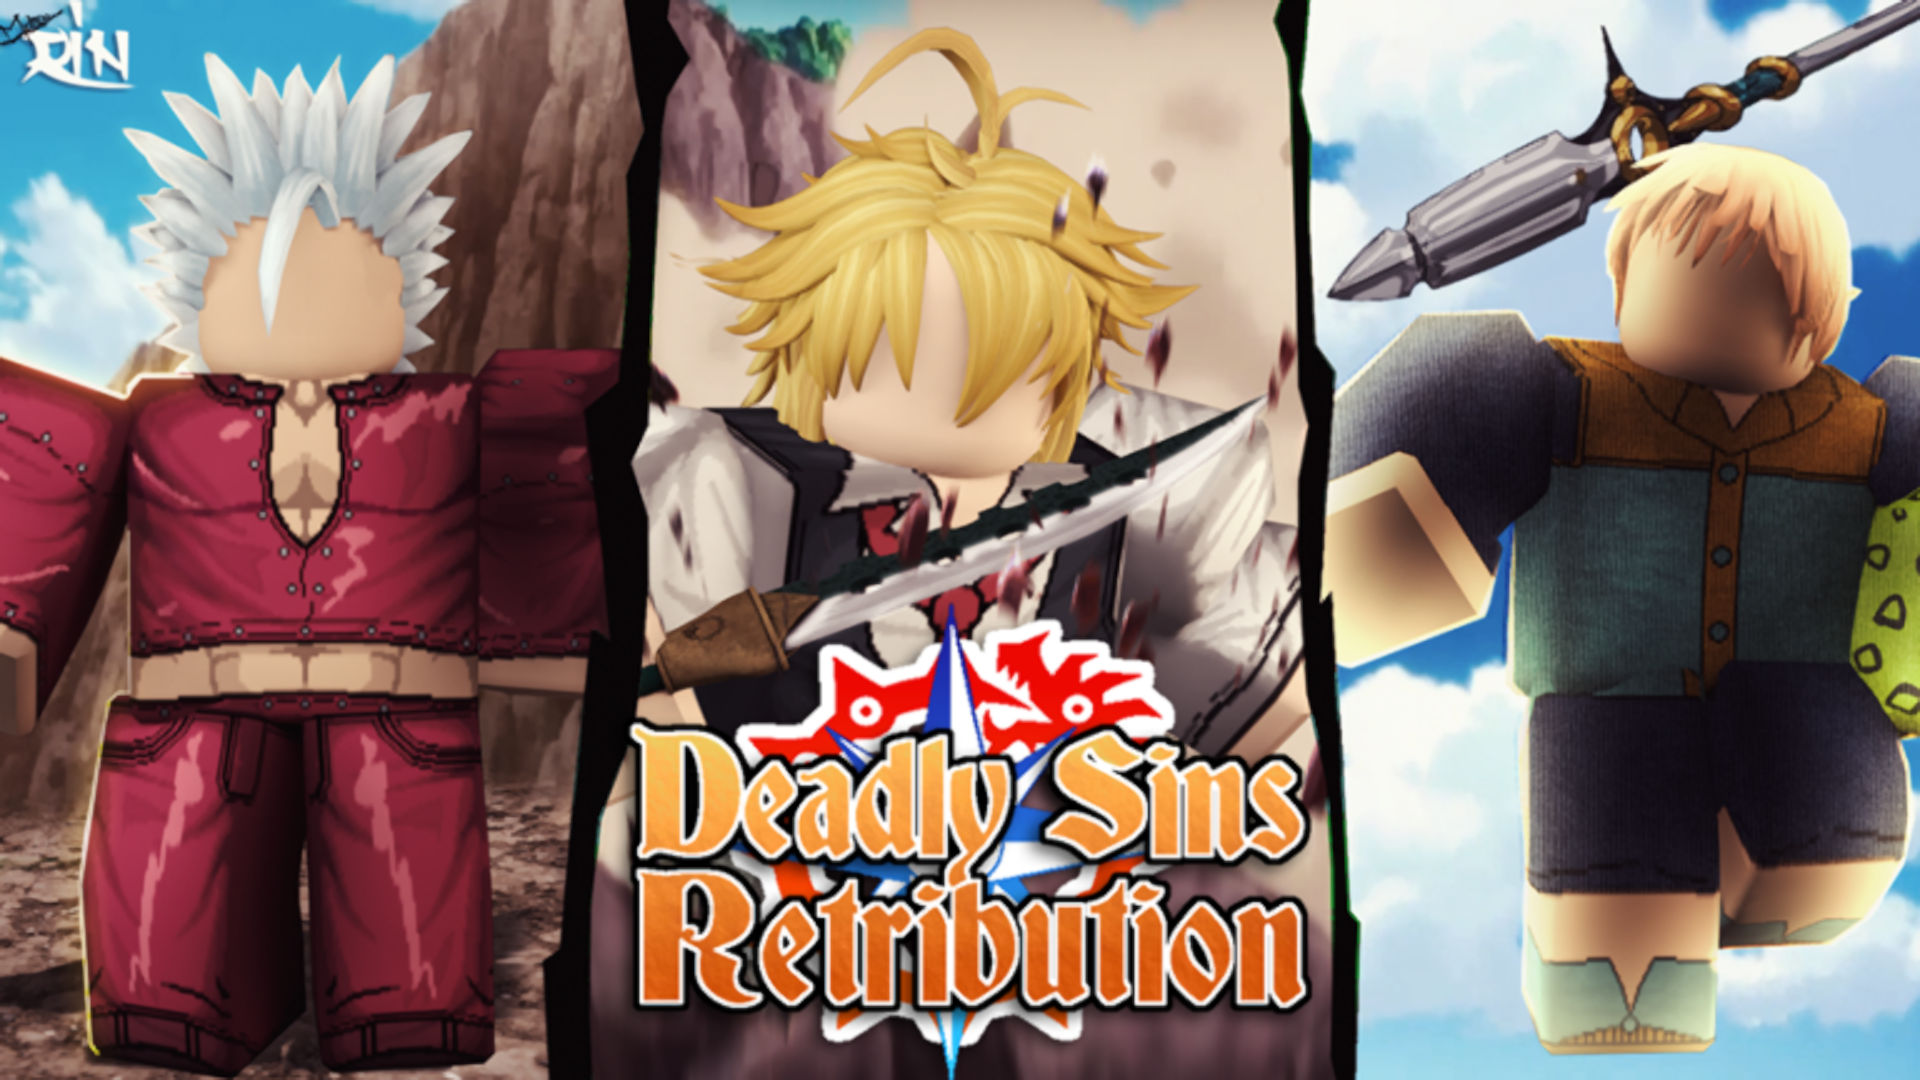 Deadly Sins Retribution tier list – all races ranked